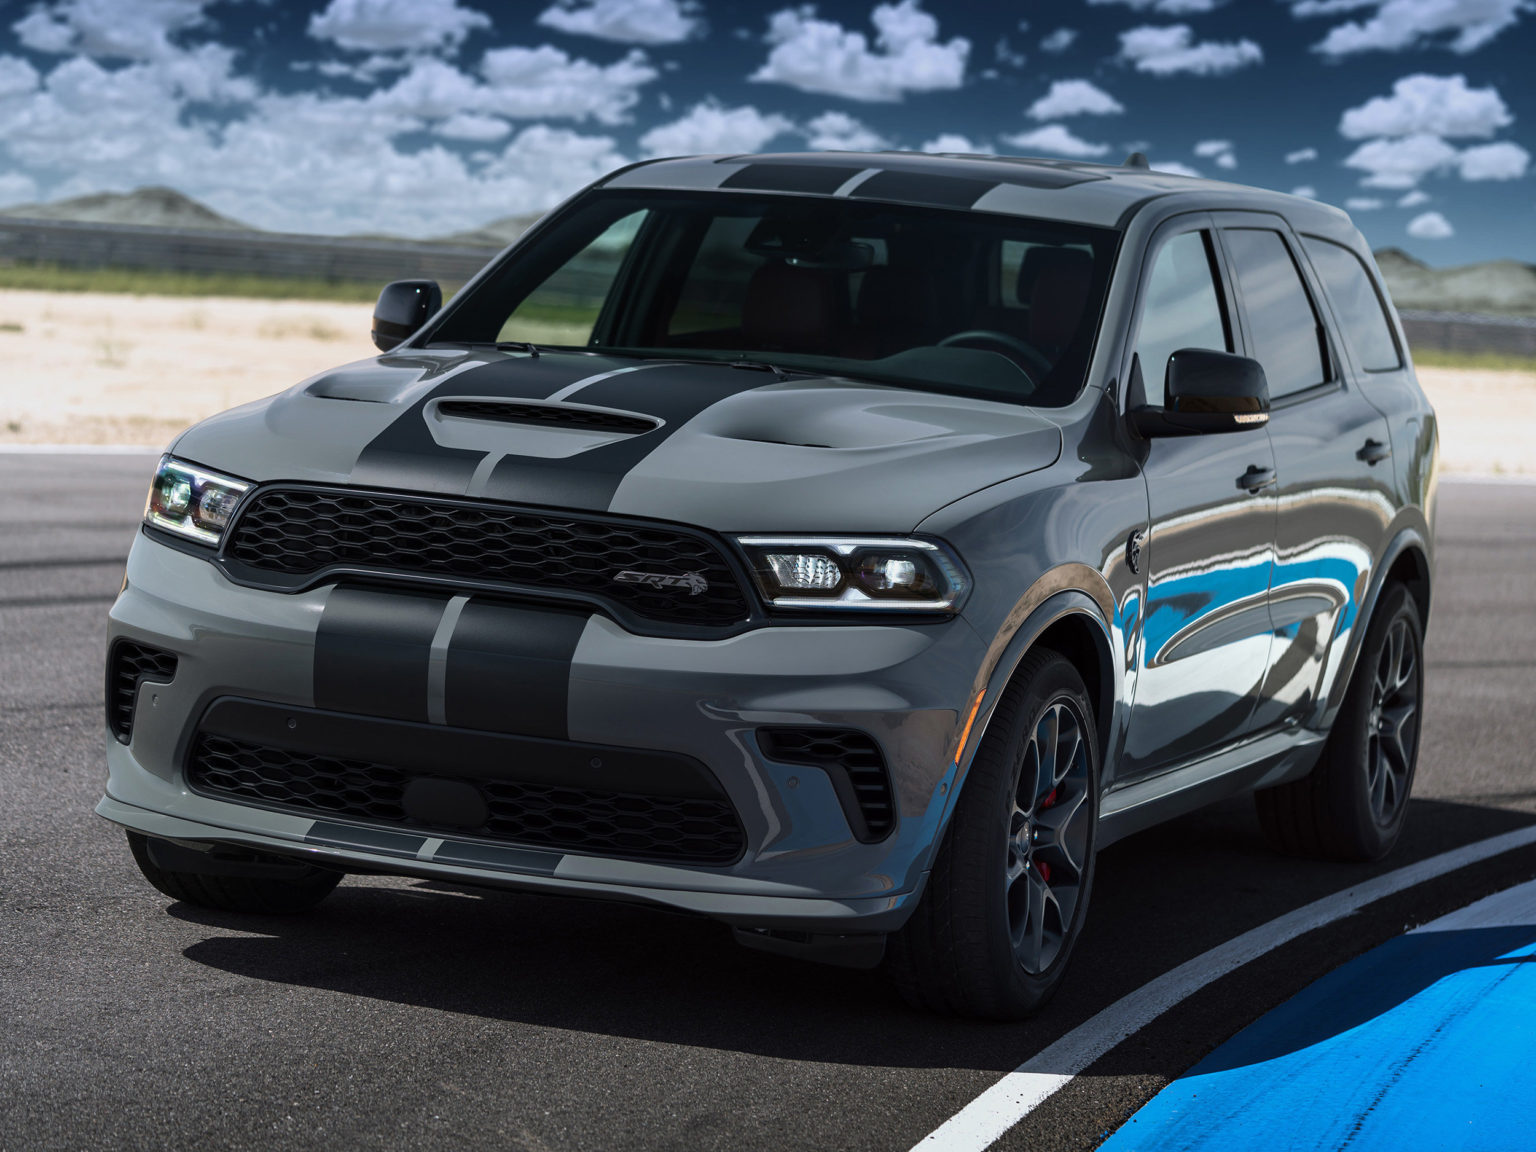 2021 Dodge Durango SRT Hellcat delivers 710 horsepower and a satisfying purr.